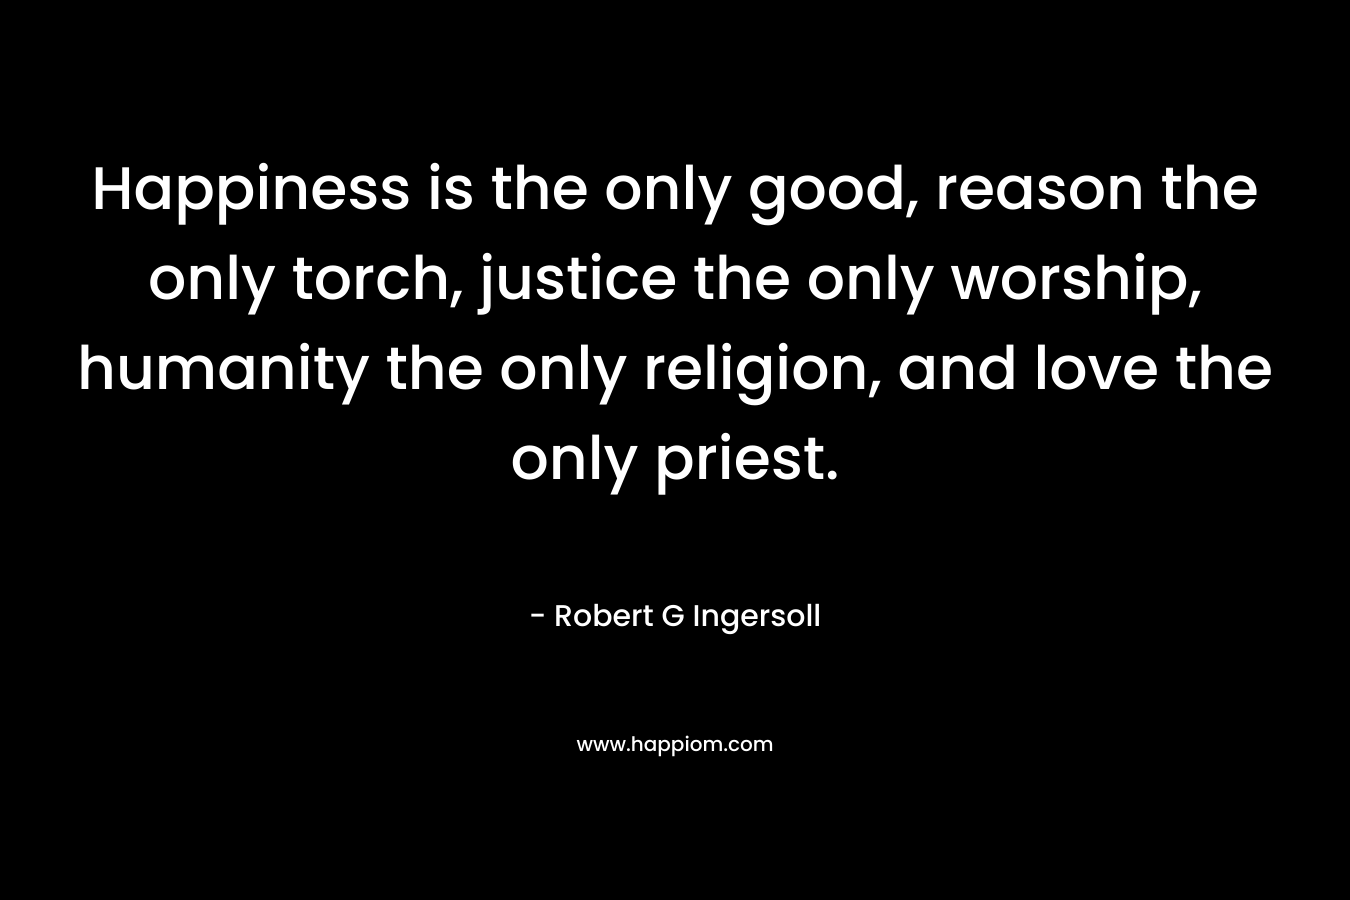 Happiness is the only good, reason the only torch, justice the only worship, humanity the only religion, and love the only priest.